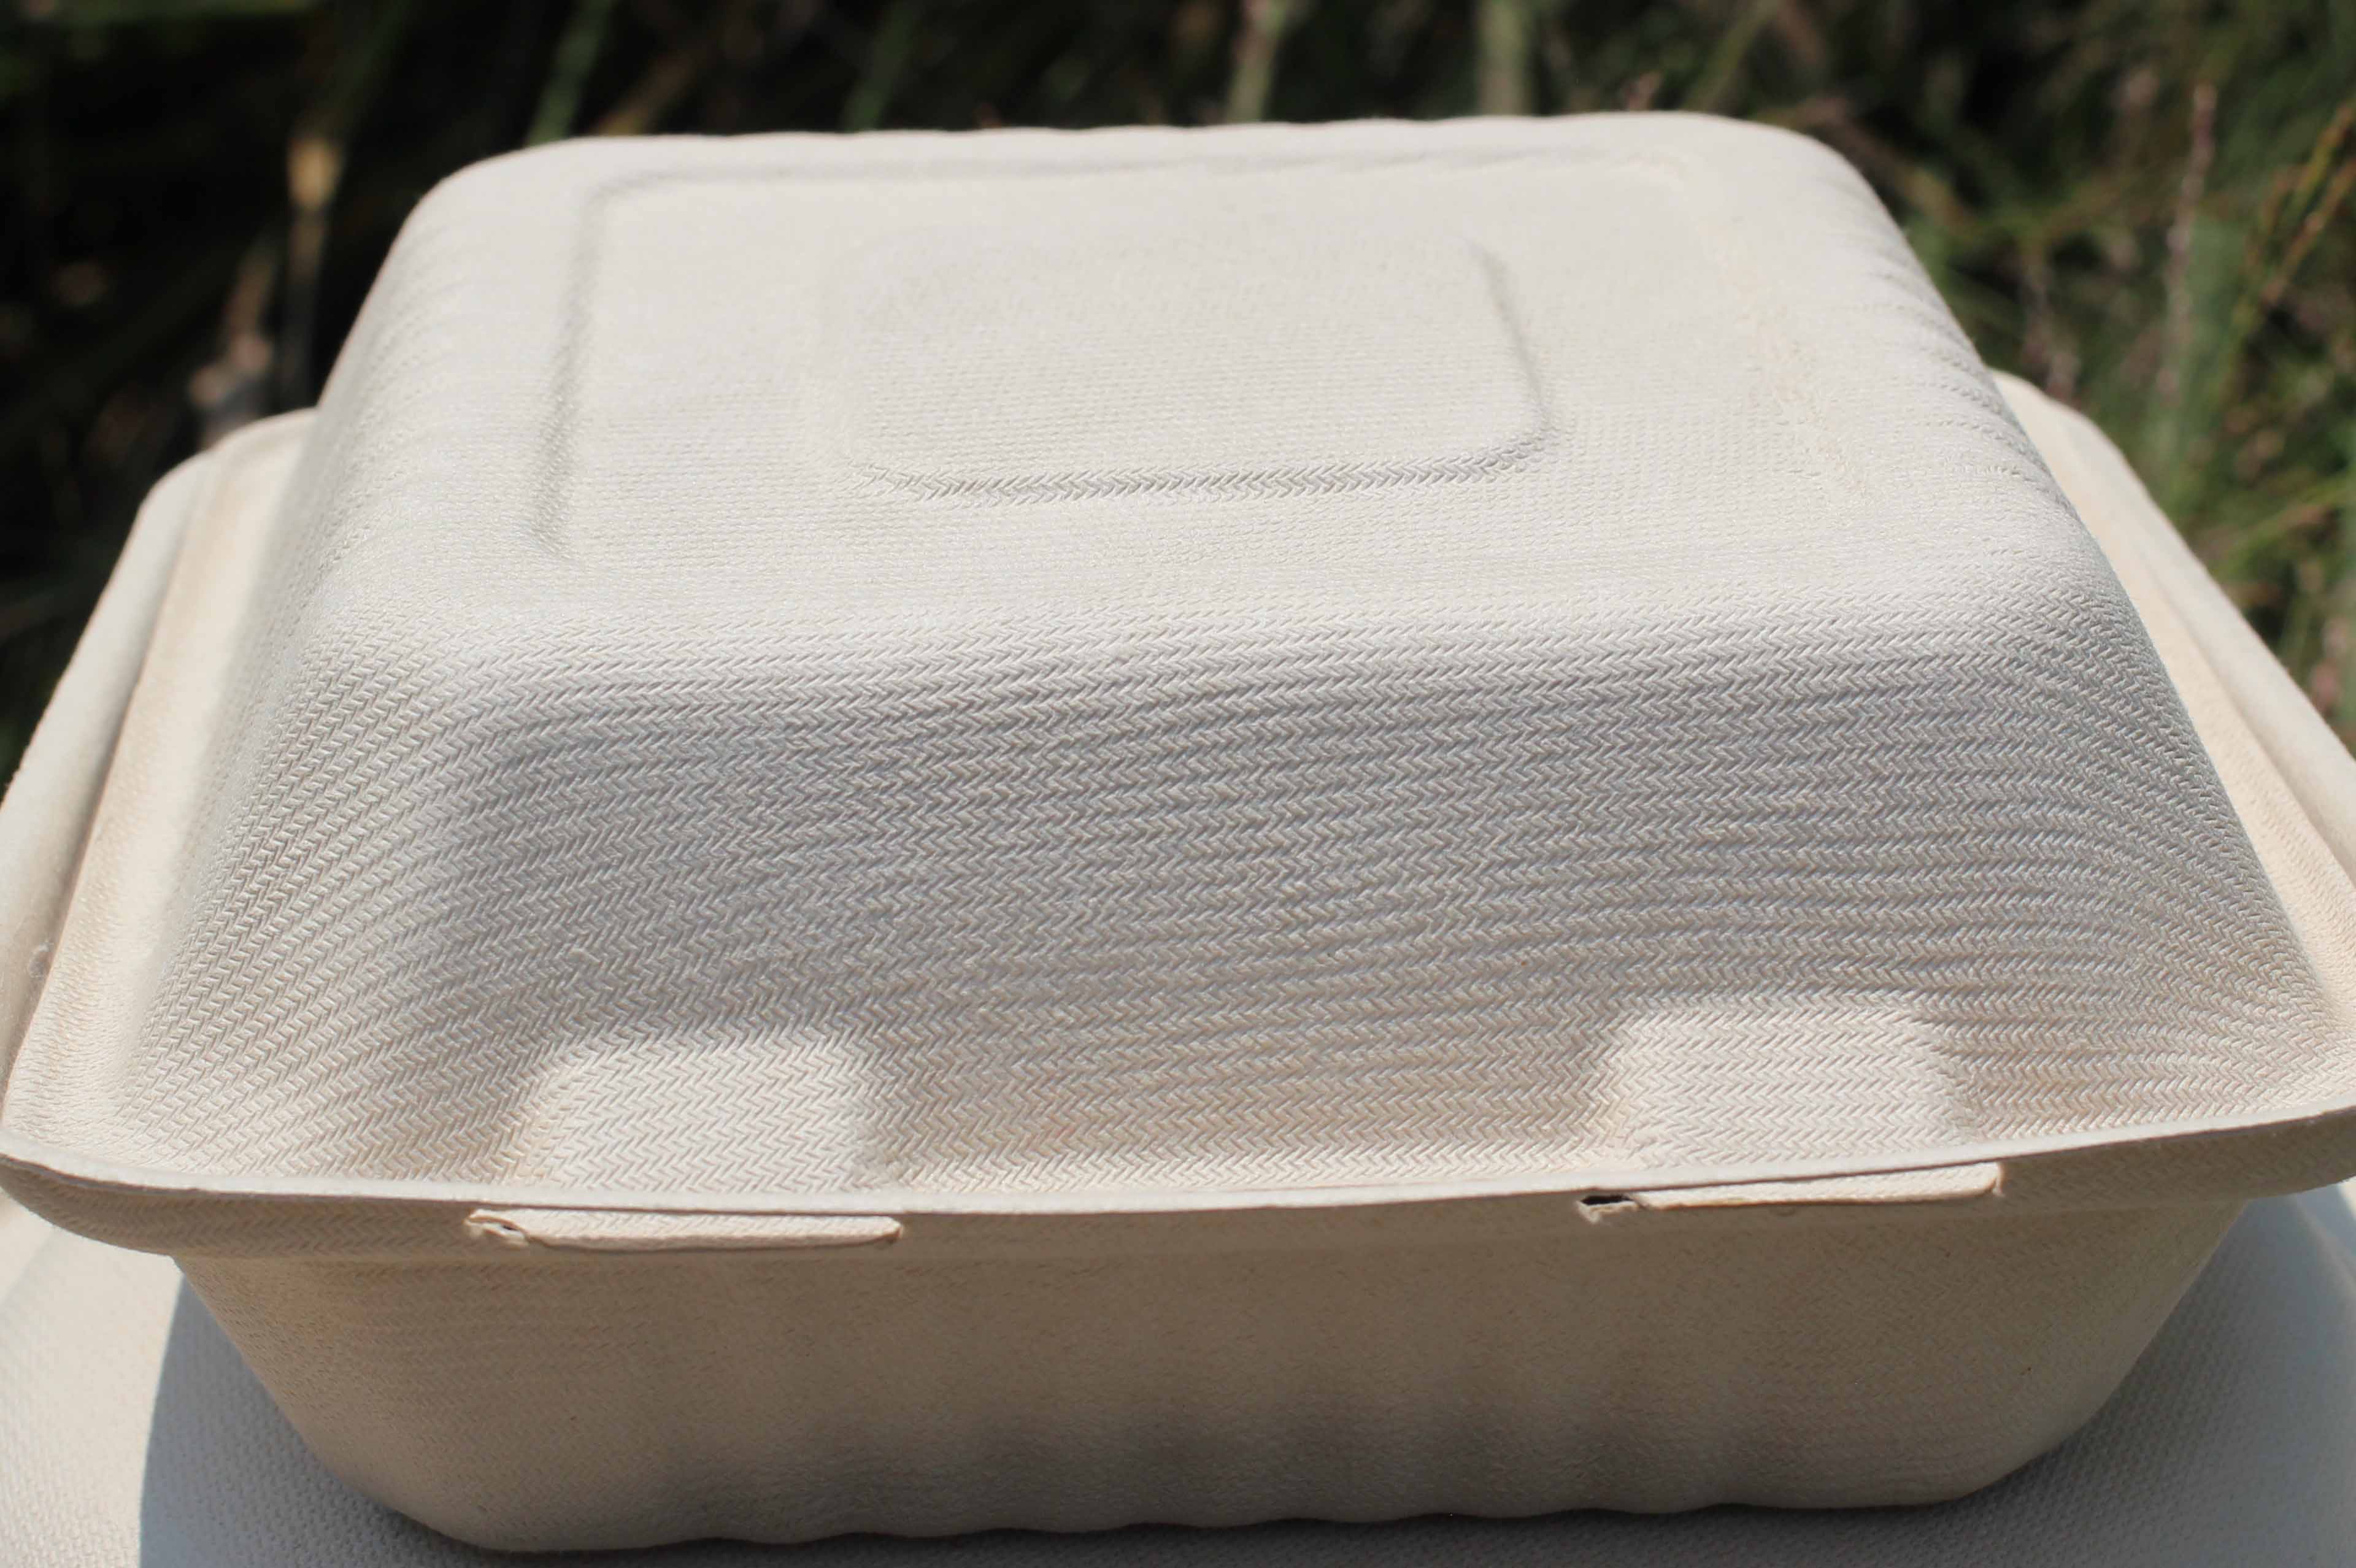 3 Things Consumers Look for in Disposable Food Service Products